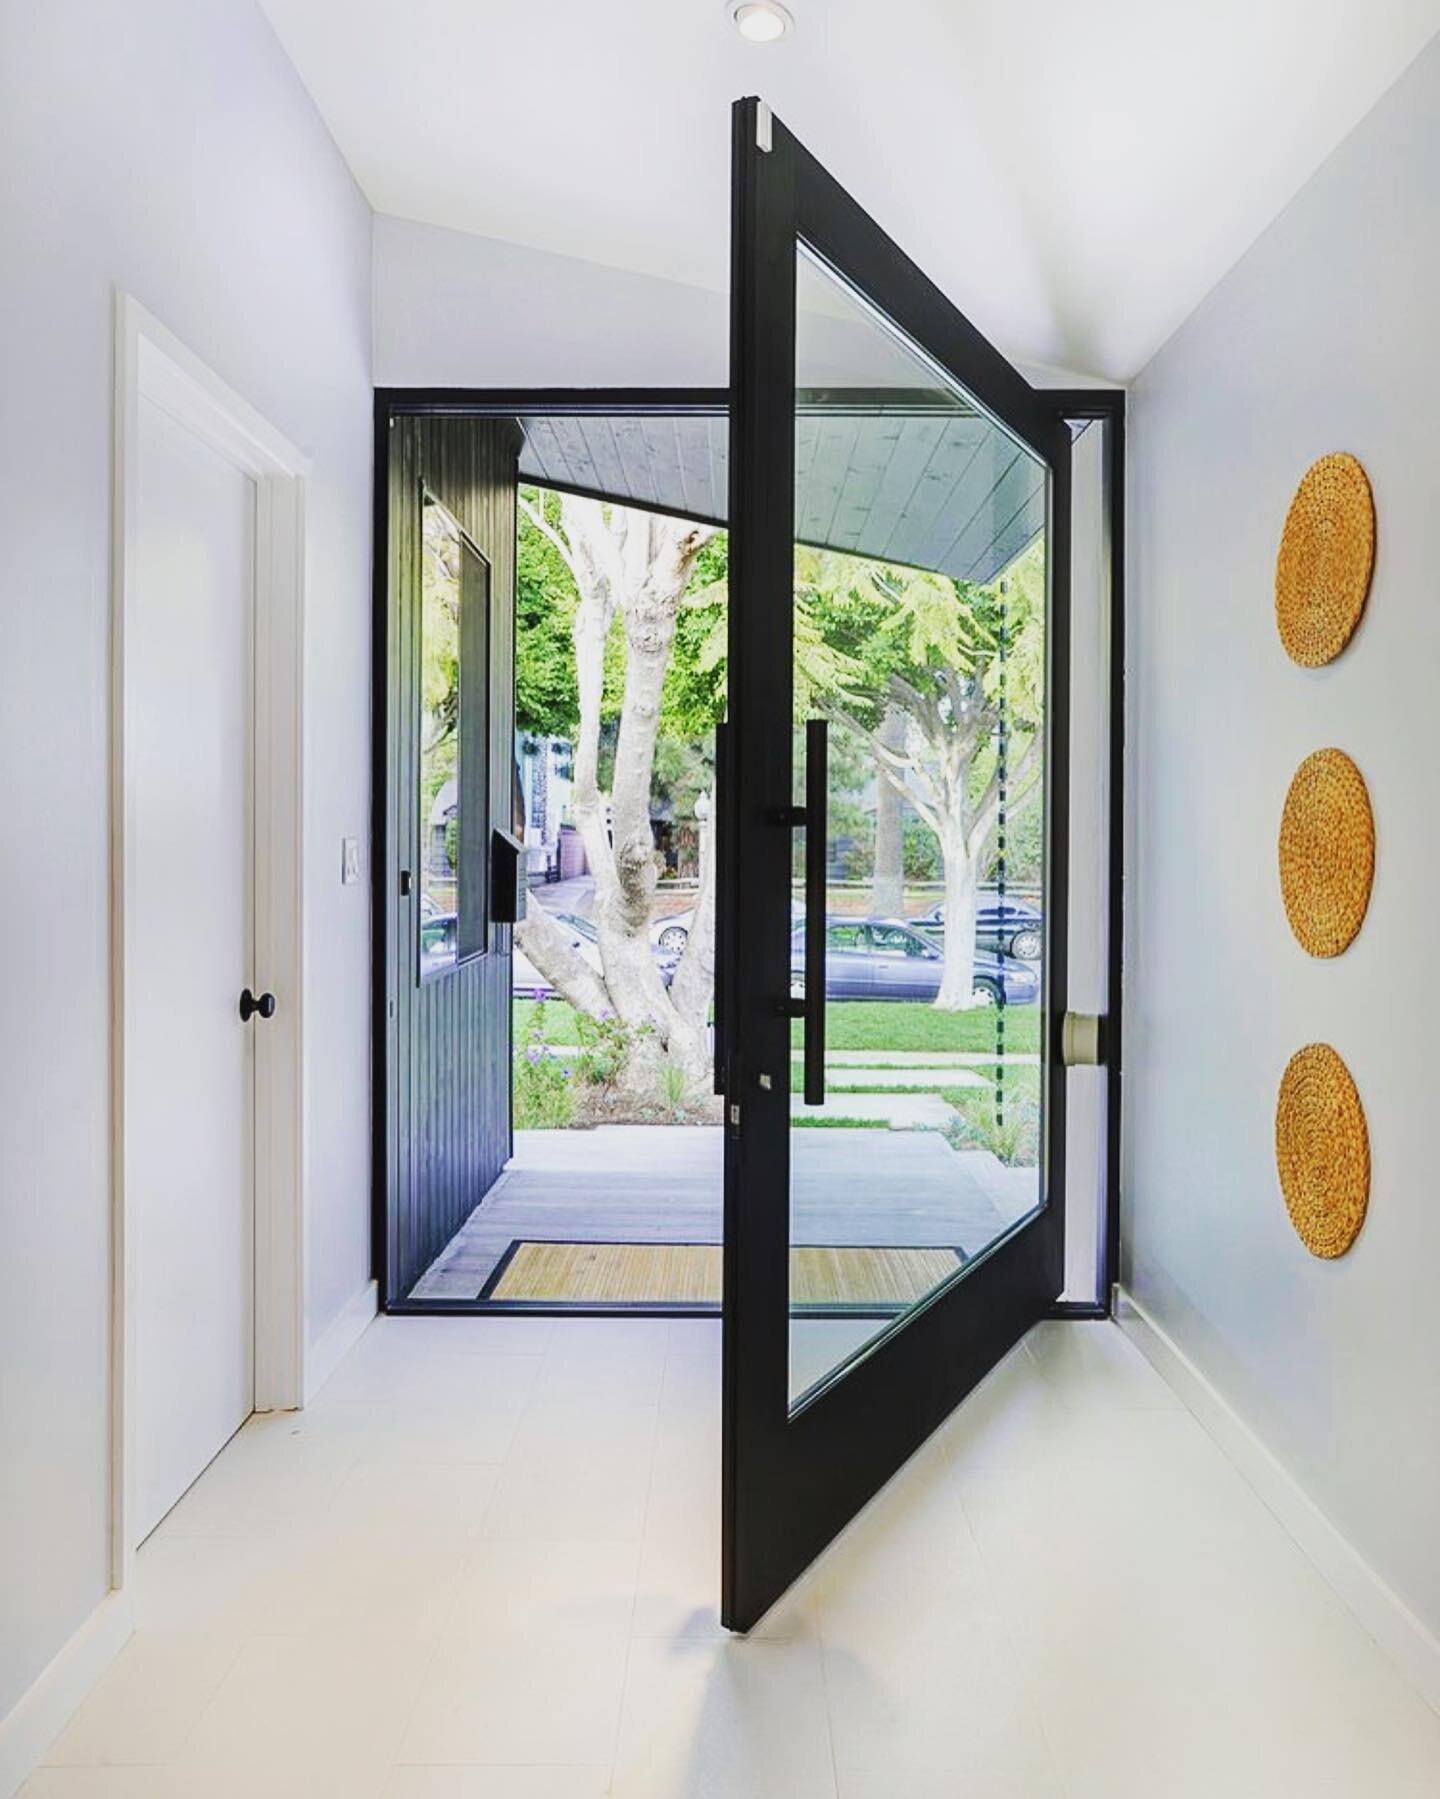 For our new house build &hellip;I&rsquo;m feeling this kind of front door vibe. #pivotdoor #pivotdoorsvancouver #kleendesign #thenest #thenest@1001steps